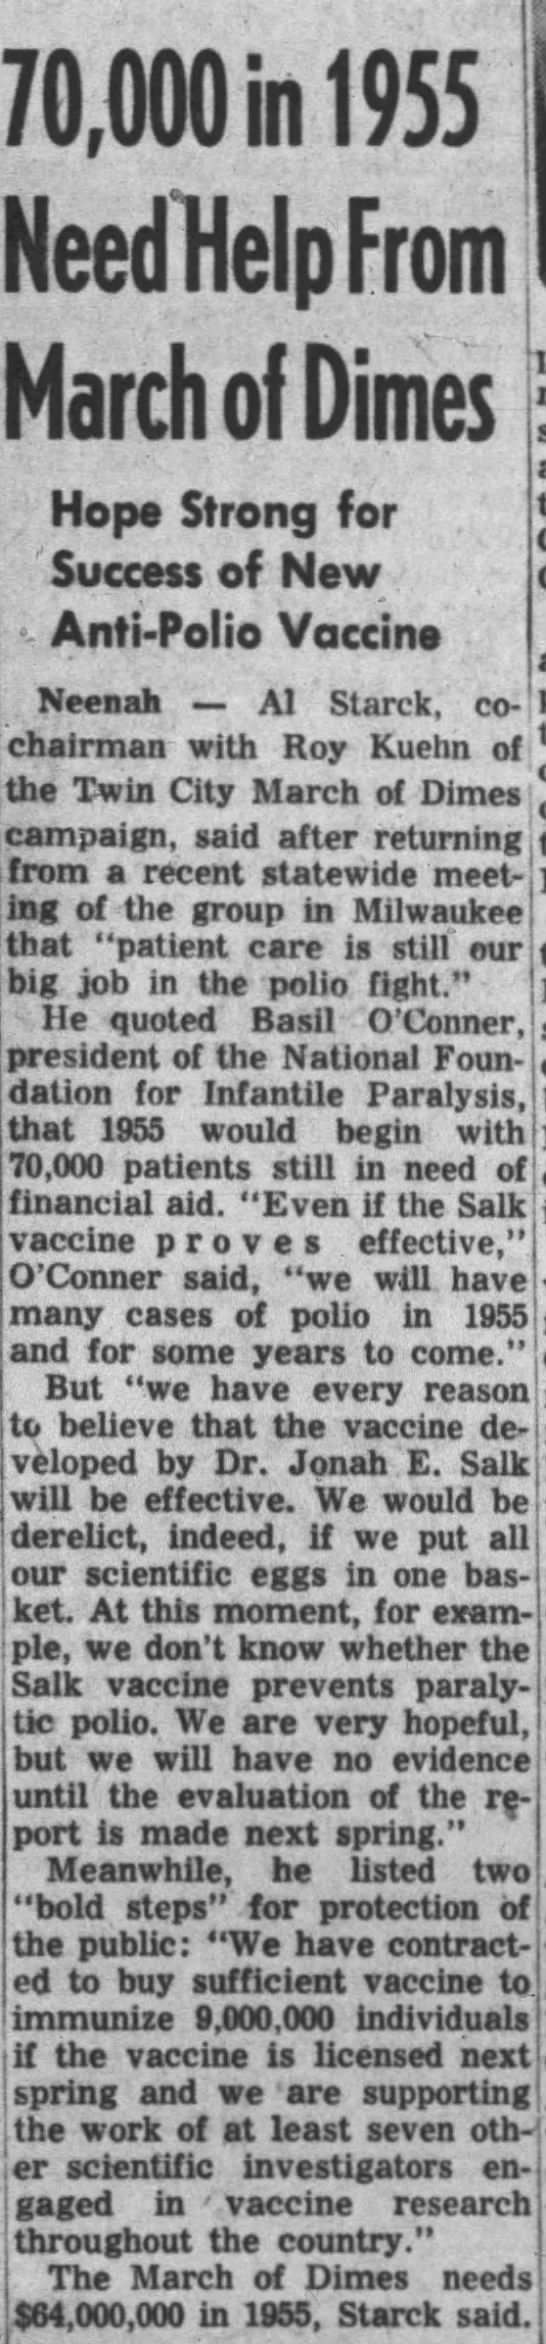 70,000 in 1955 Need Help From March of Dimes. 12.31.1954. The Post-Crescent - 